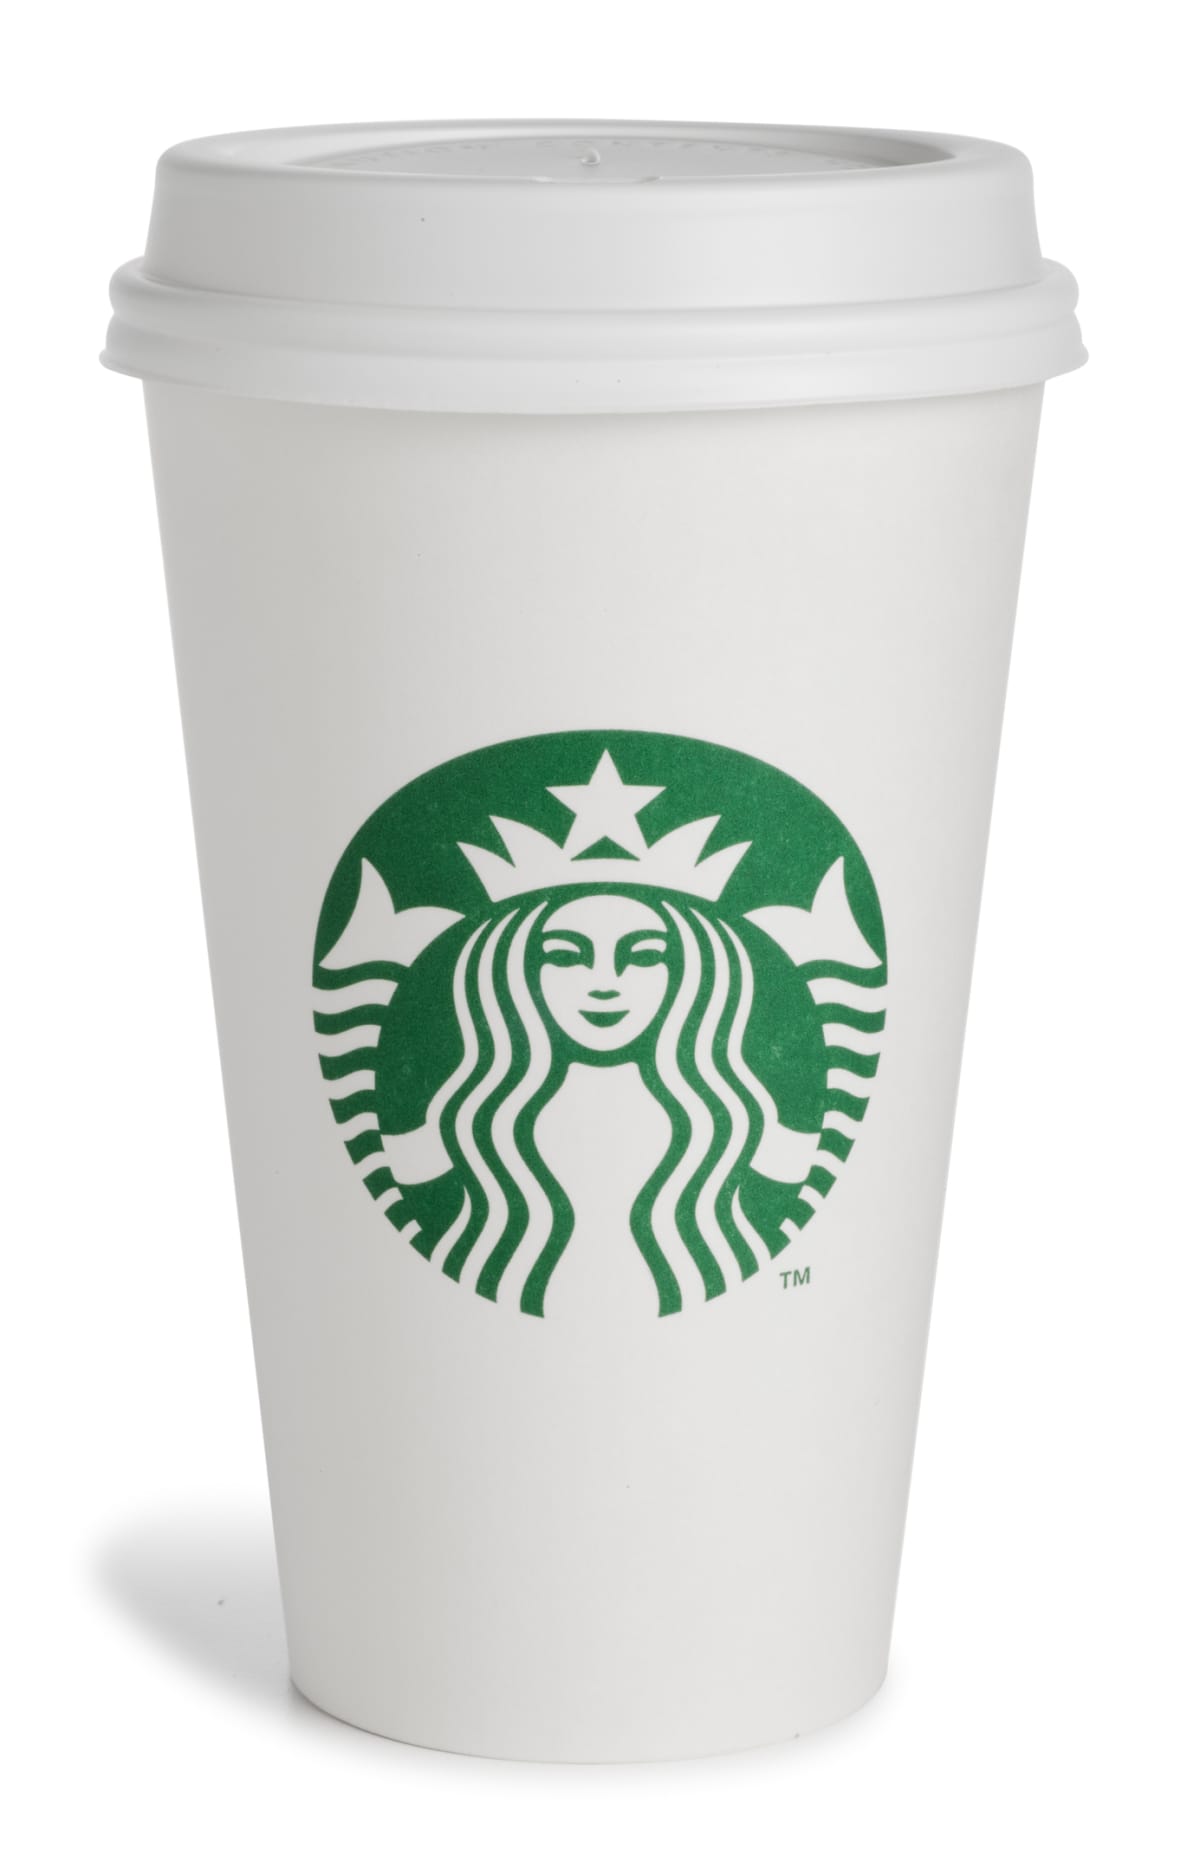 Starbucks cup against a white background